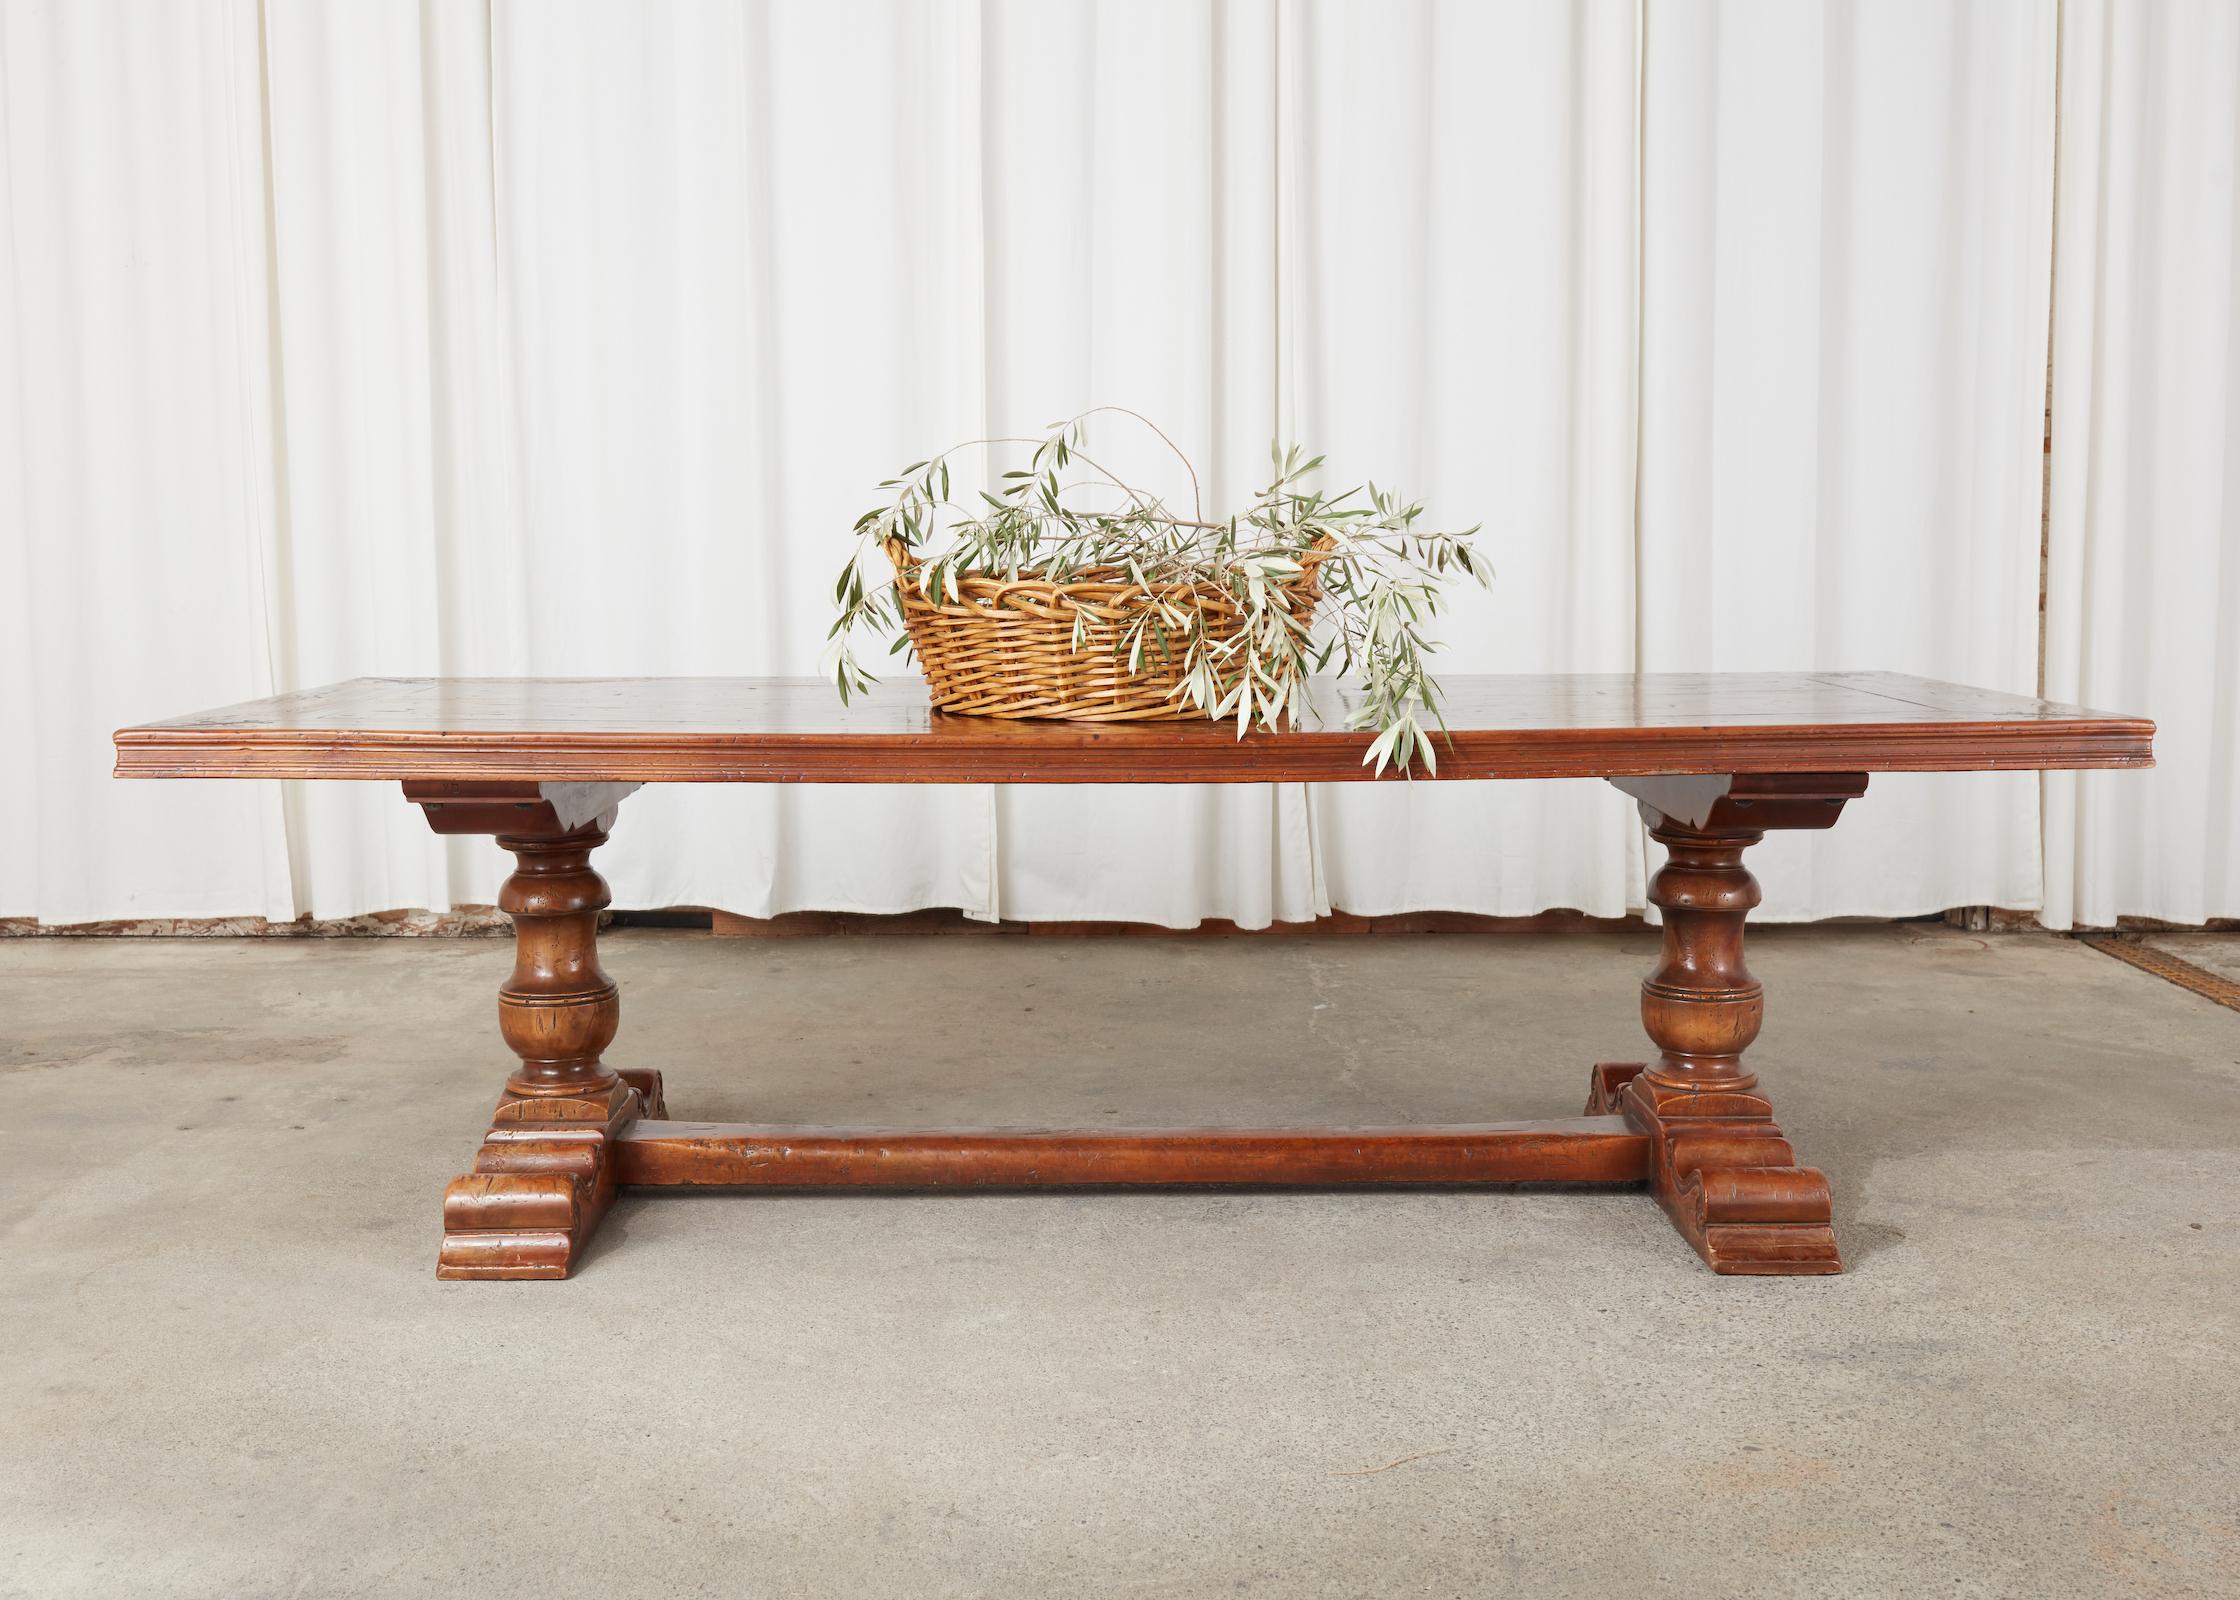 Magnificent French walnut trestle dining table or refectory table hand-crafted in the baroque monastery style. The table features an inlaid top made of thick hand-formed timbers decorated with a black accent and a French fleur de lis design on each